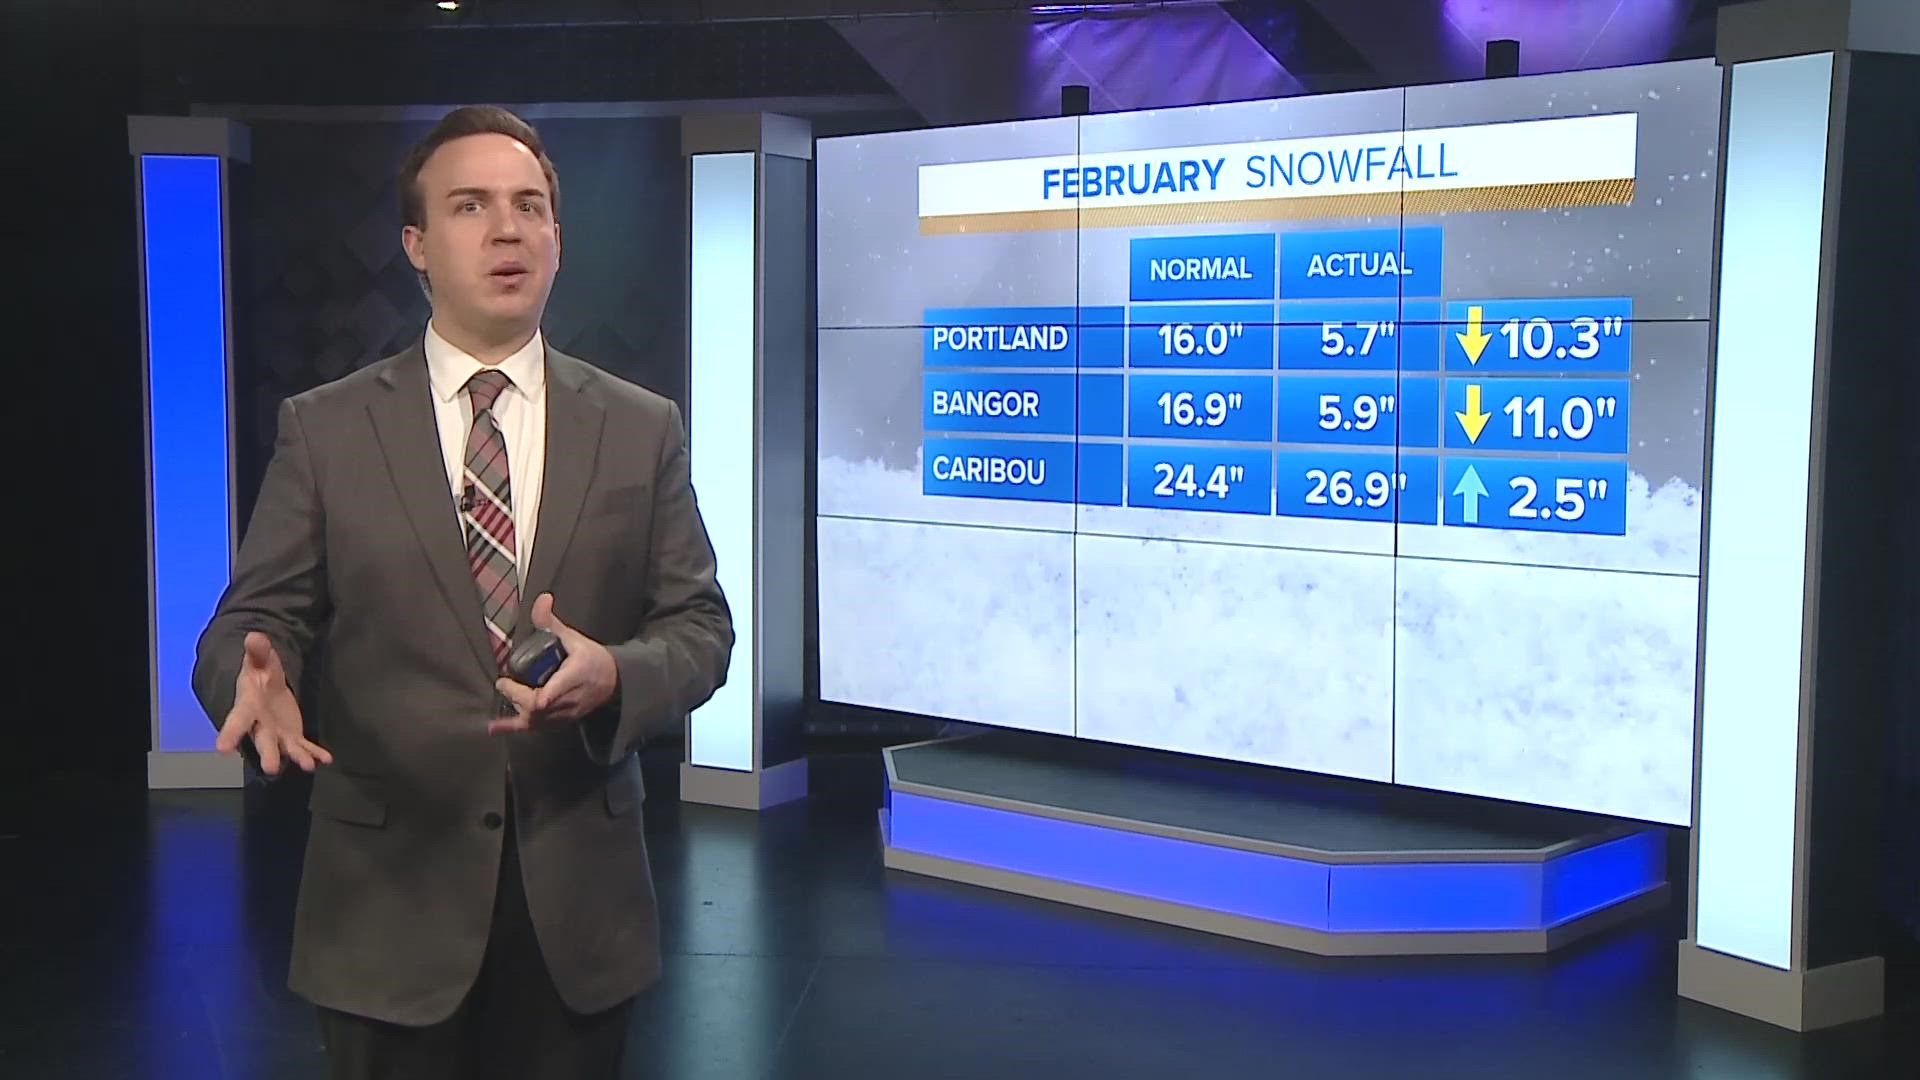 We have gone from cold to warm and from a snow deficit to a winter weather pattern, all in the month of February.